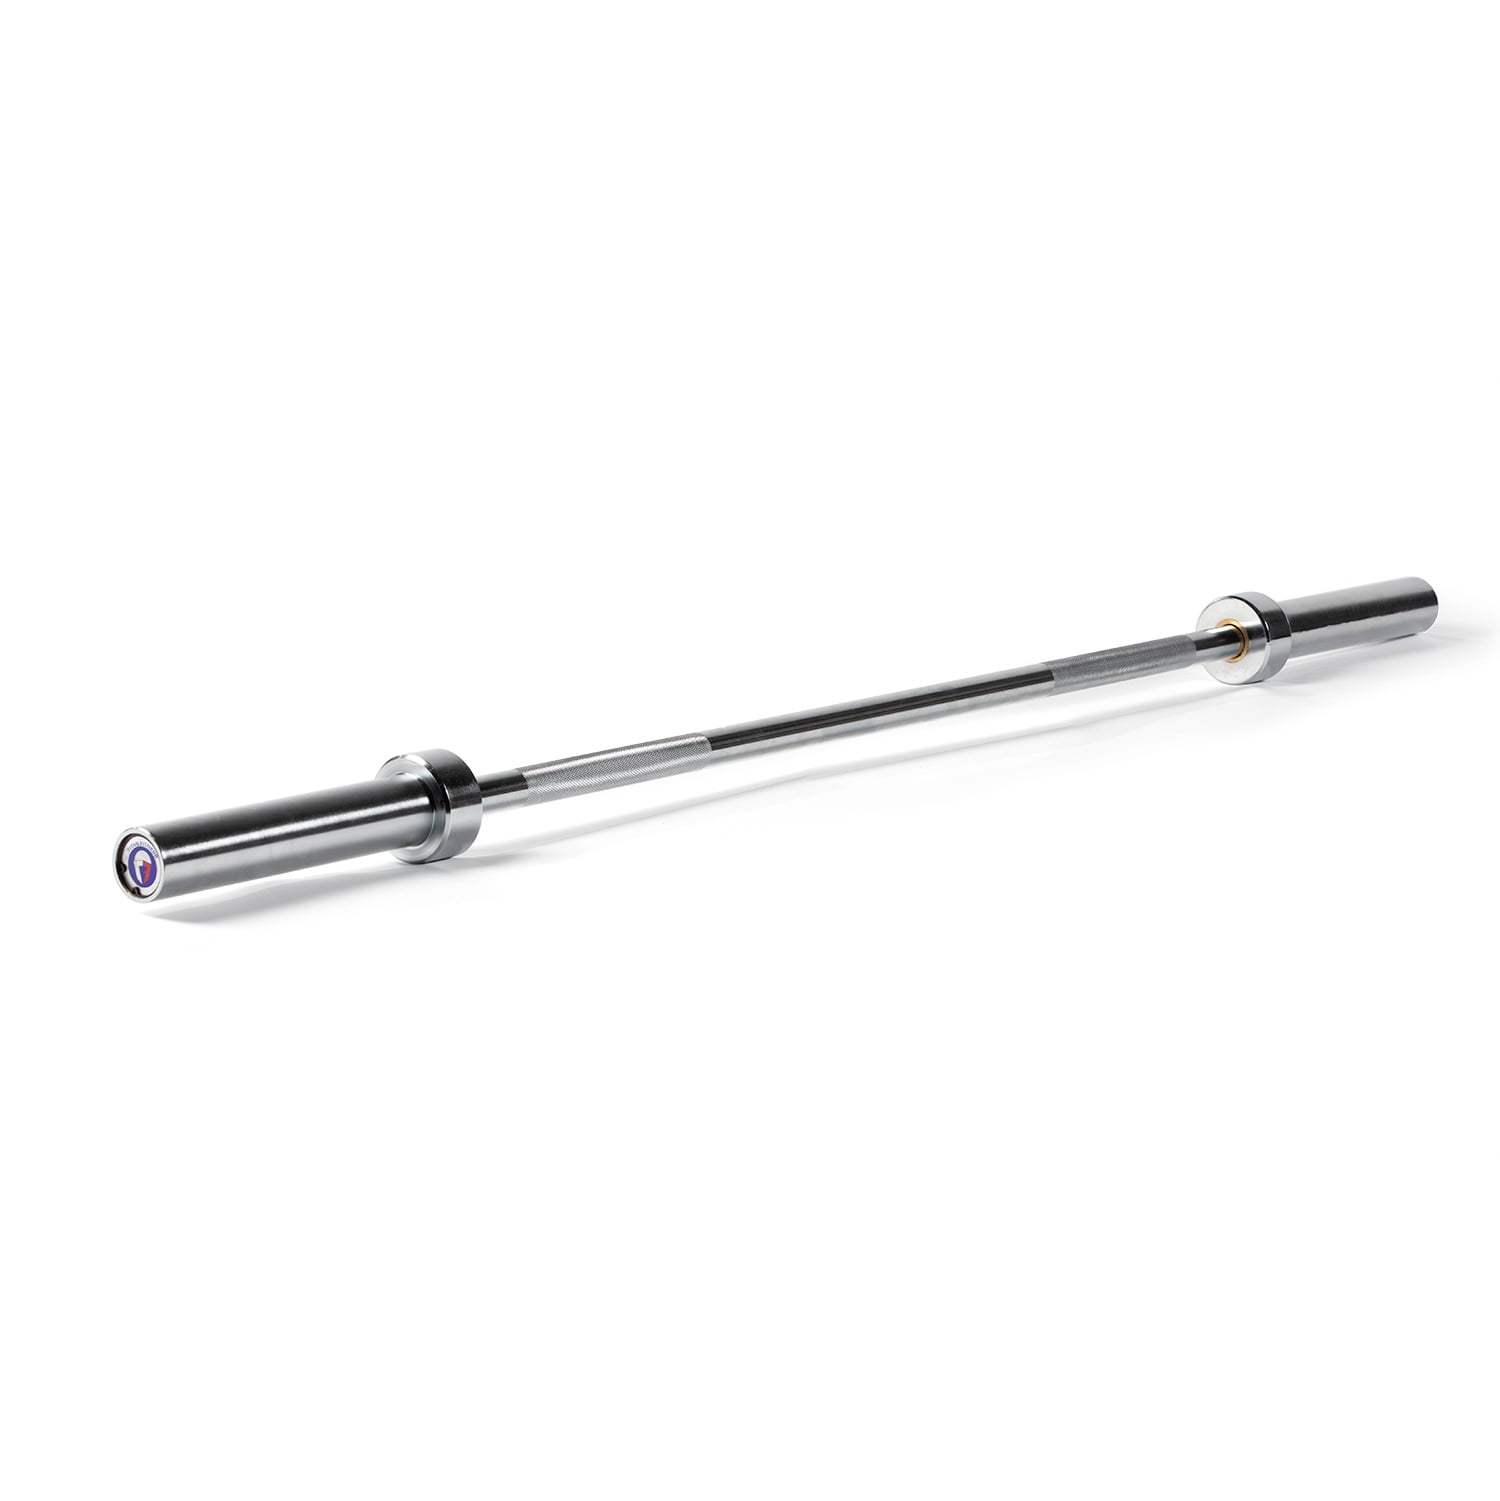 Details about   BRAND NEW CAP Barbell Olympic 2-Inch Solid Chrome Bar 6-Foot  OB-72 Black 